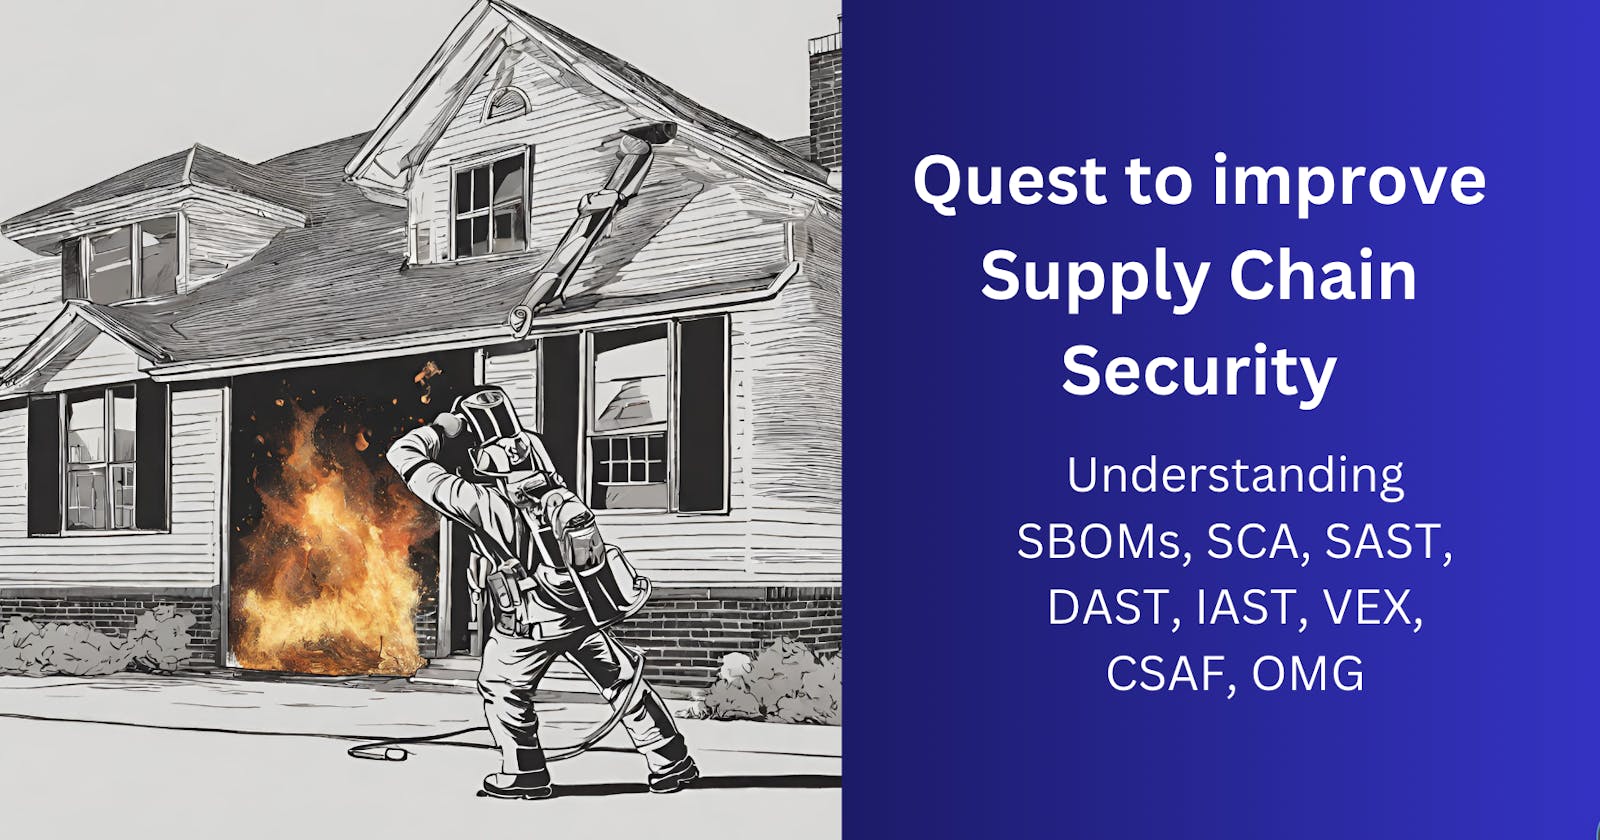 The quest to improve Supply Chain Security